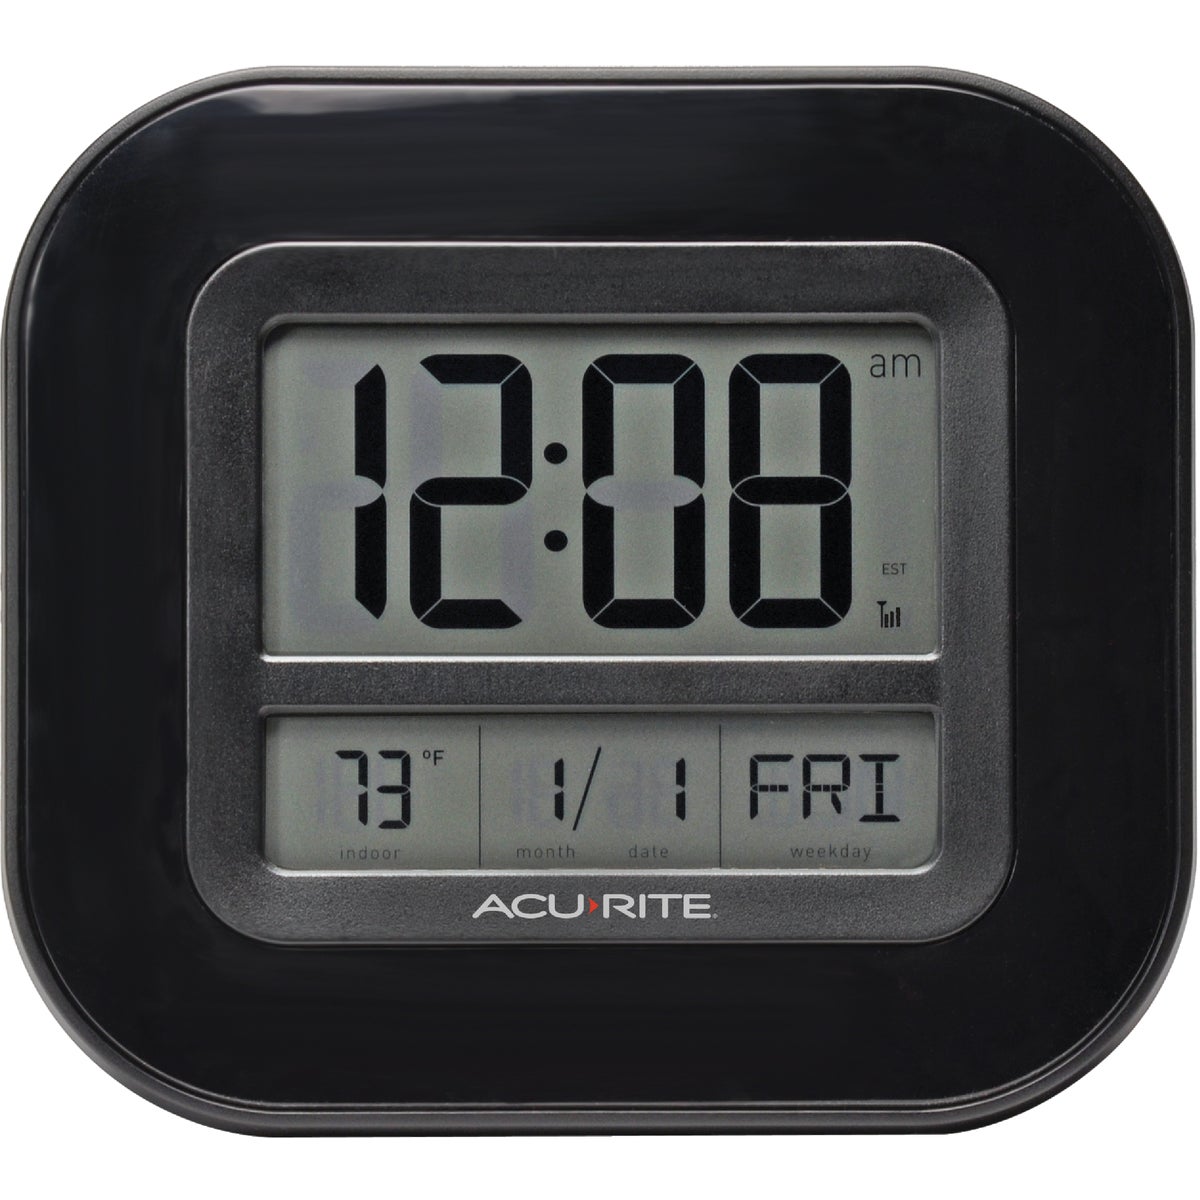 Item 650781, LCD wall clock with large LCD display showing the day, date, month, and 